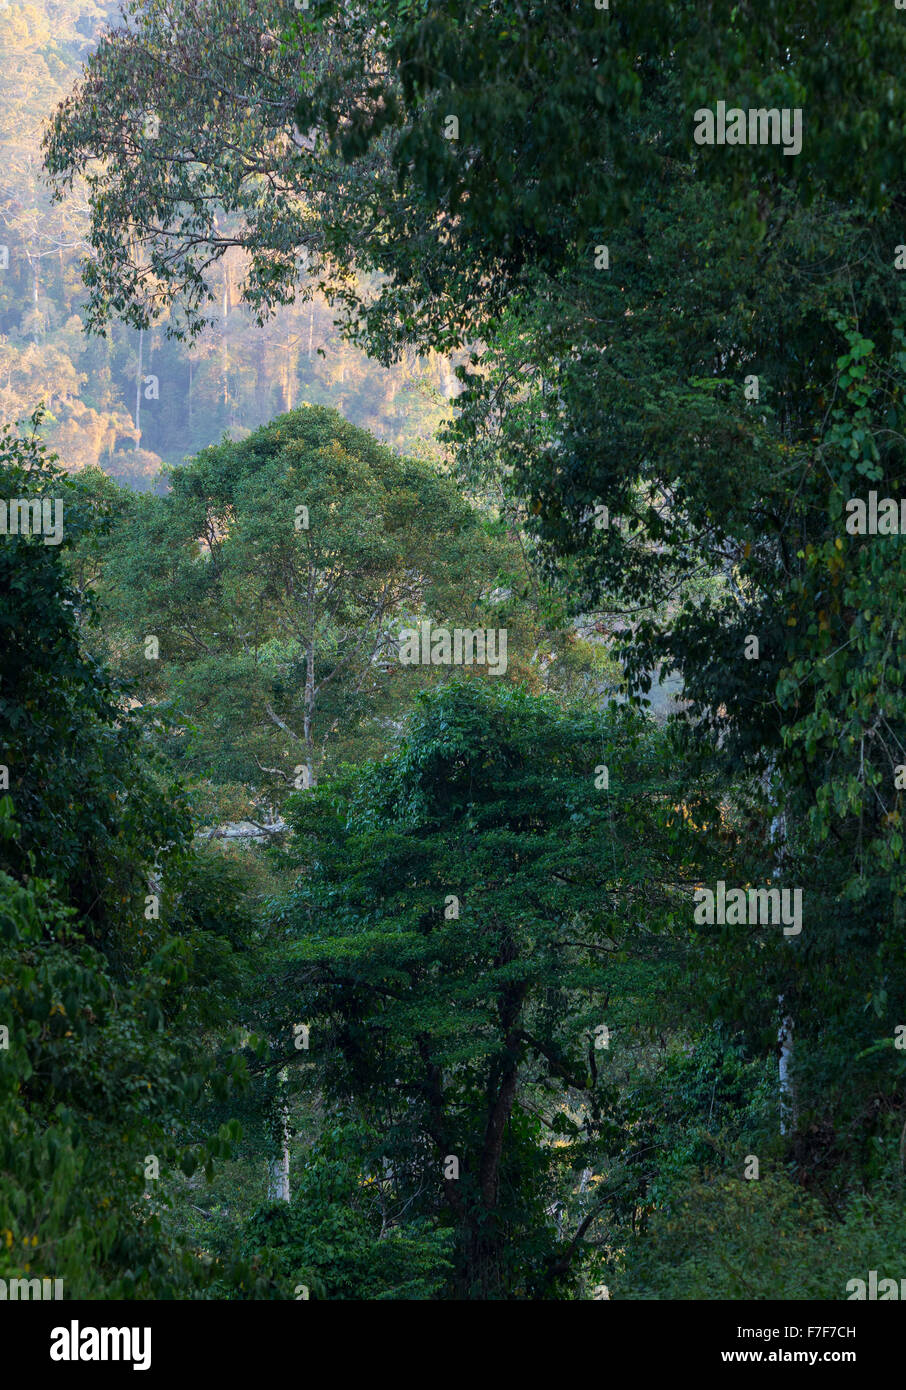 Rainforest in the Danum Valley, Sabah, Malaysia Stock Photo